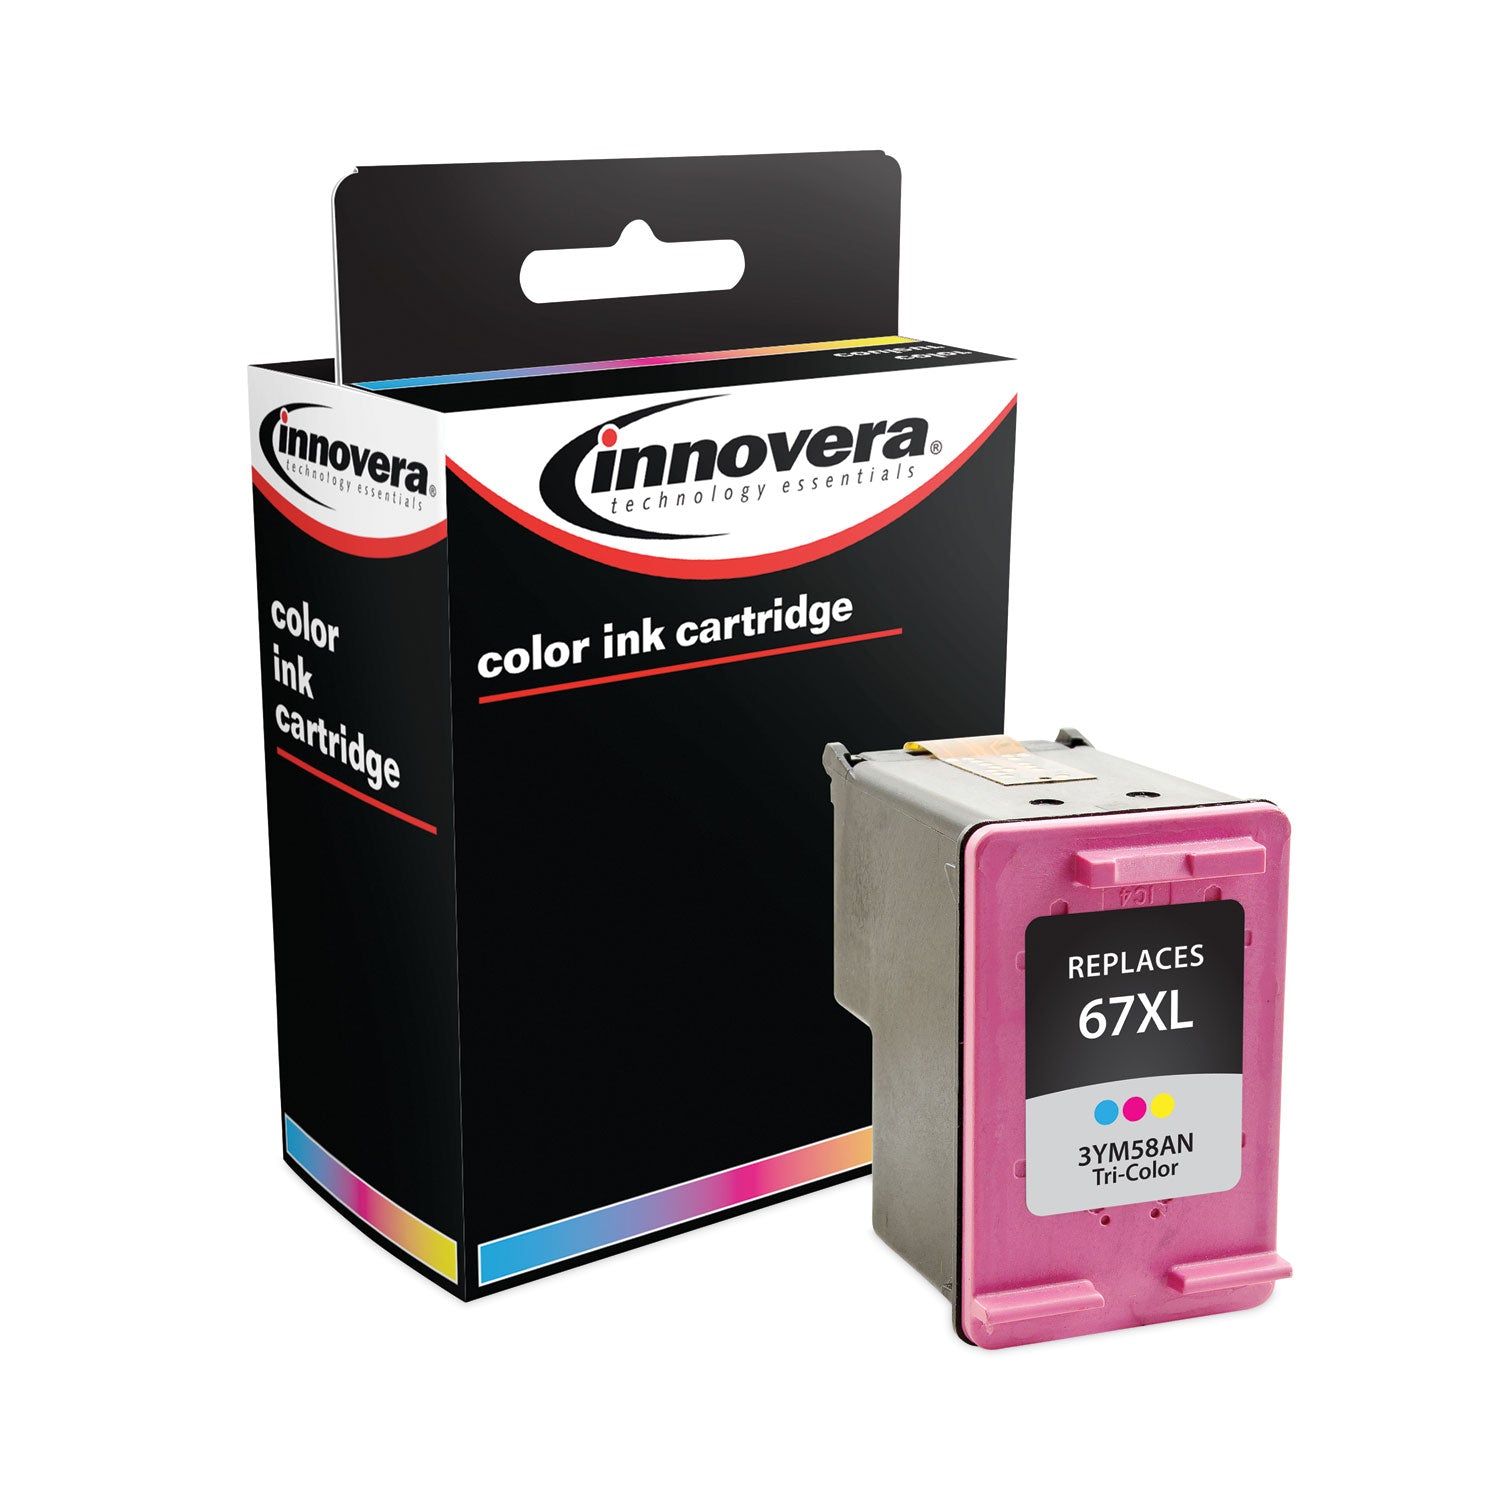 remanufactured-tri-color-ink-replacement-for-67xl-3ym58an-200-page-yield_ivr3ym58an - 1